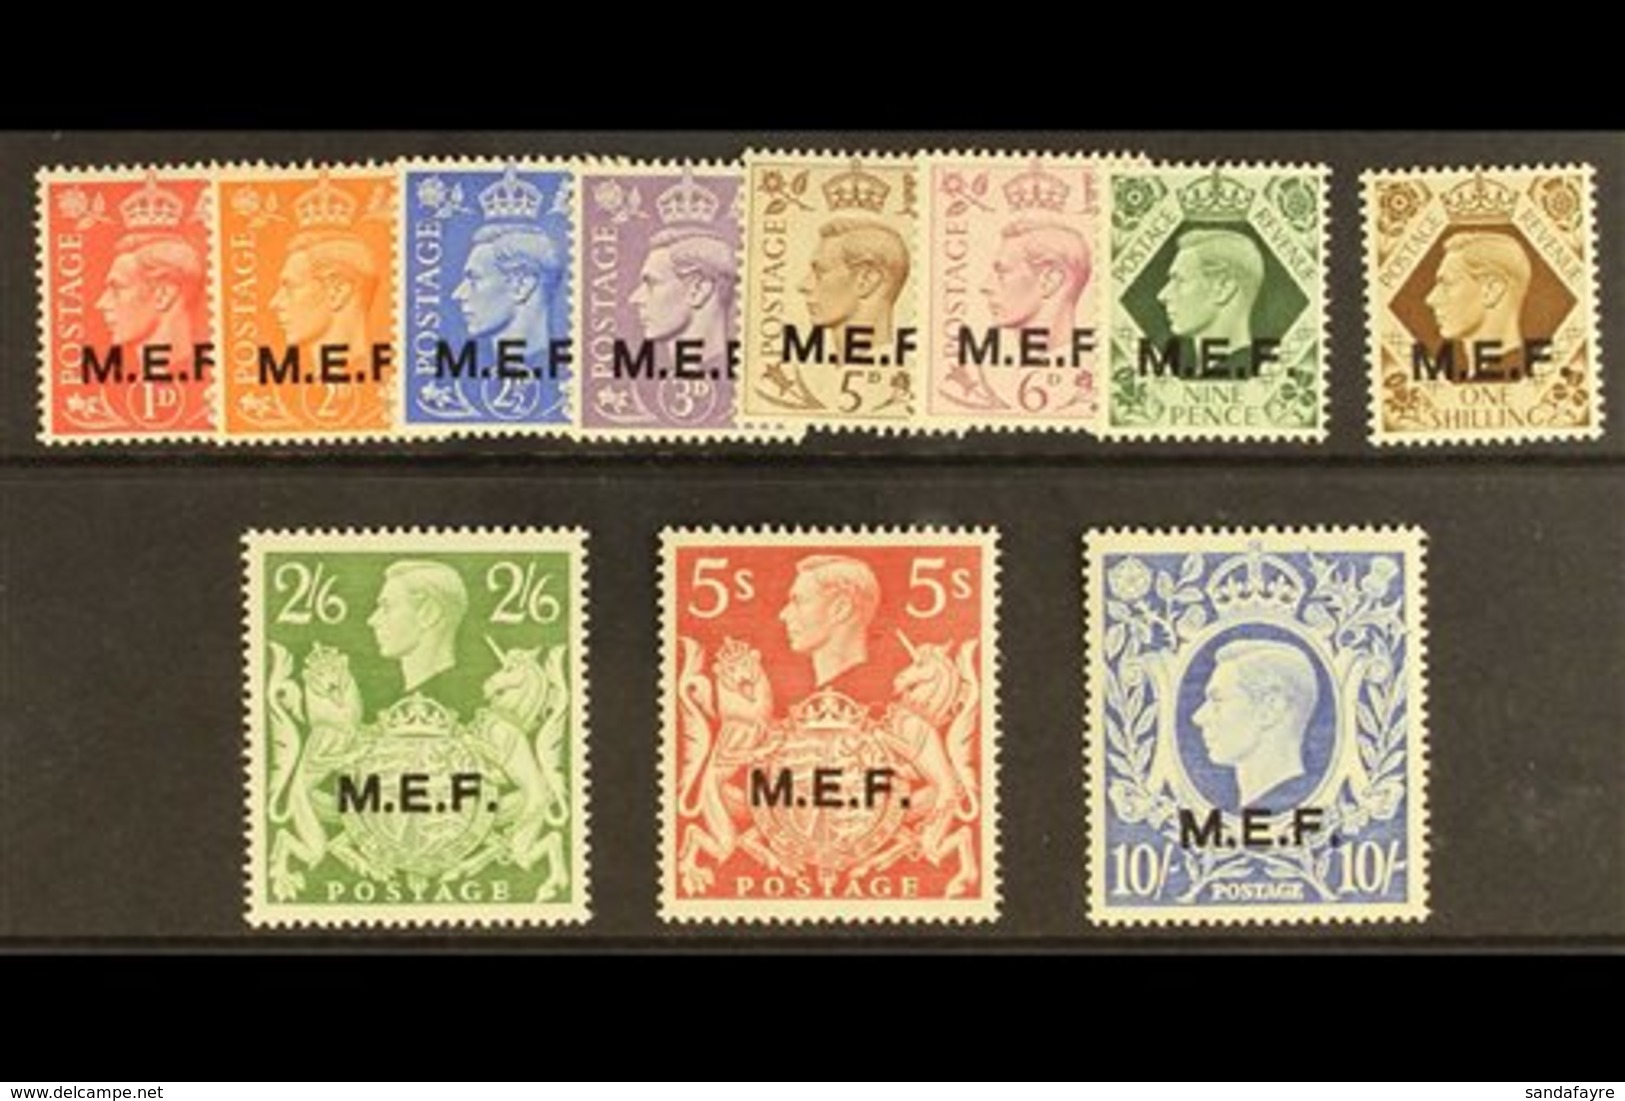 MIDDLE EAST FORCES 1943-47 "M.E.F." Overprints Complete Set, SG M11/M21, Never Hinged Mint. (11 Stamps) For More Images, - Afrique Orientale Italienne